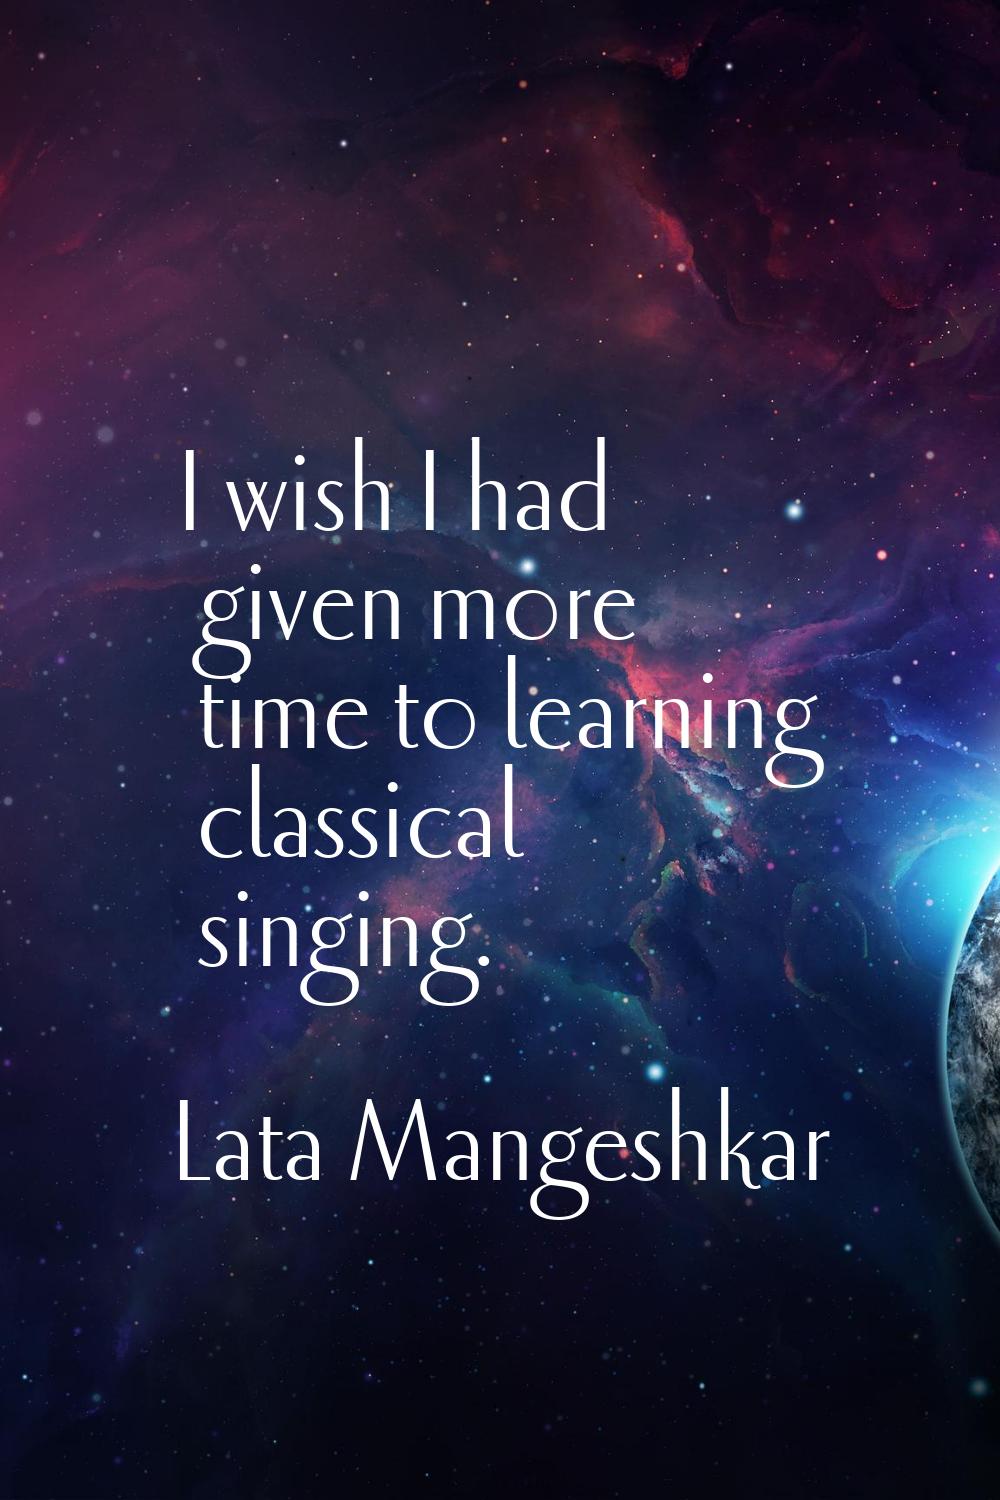 I wish I had given more time to learning classical singing.